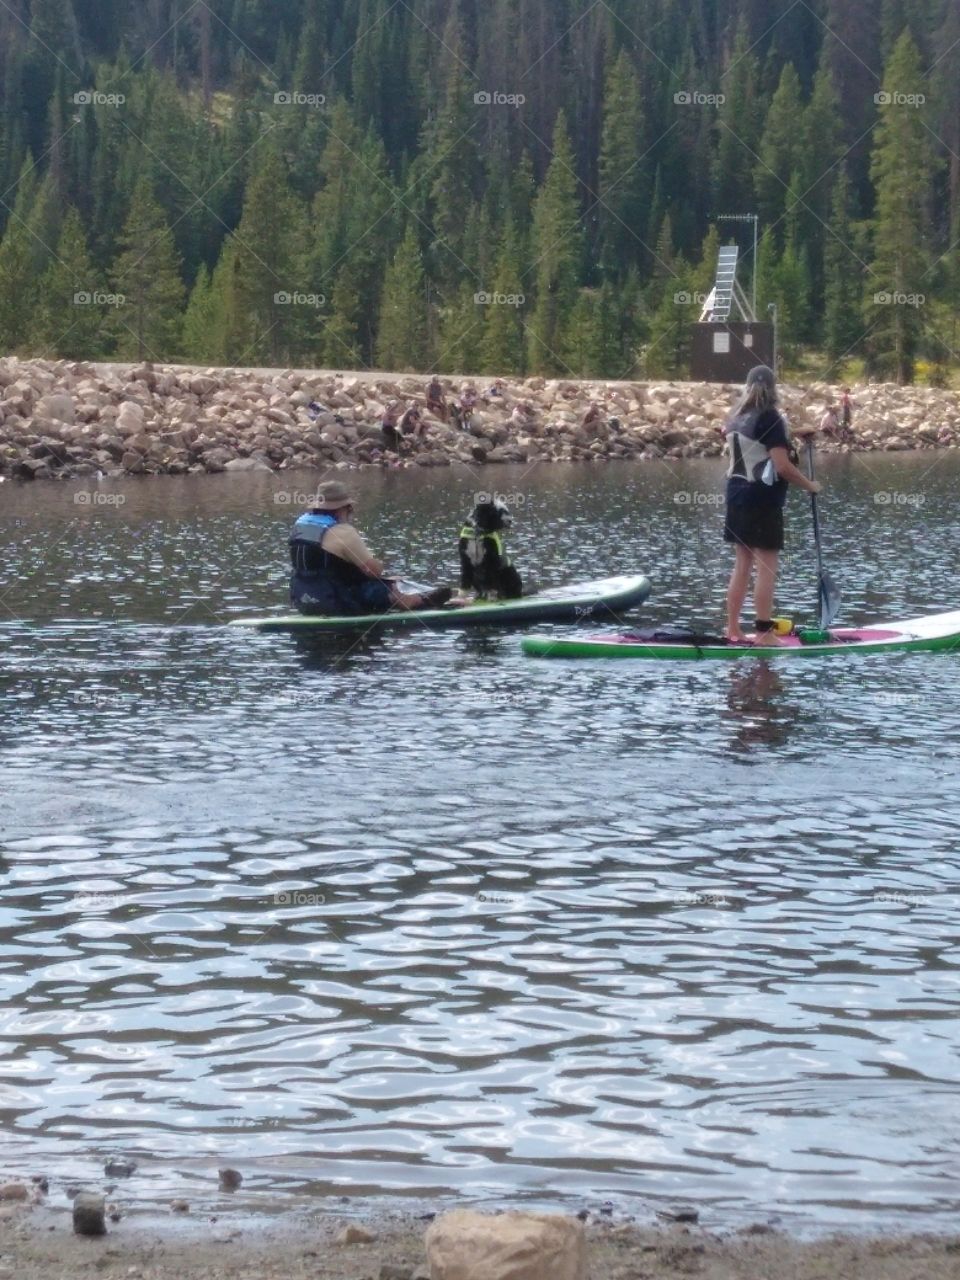 Paddle boarding on the lake